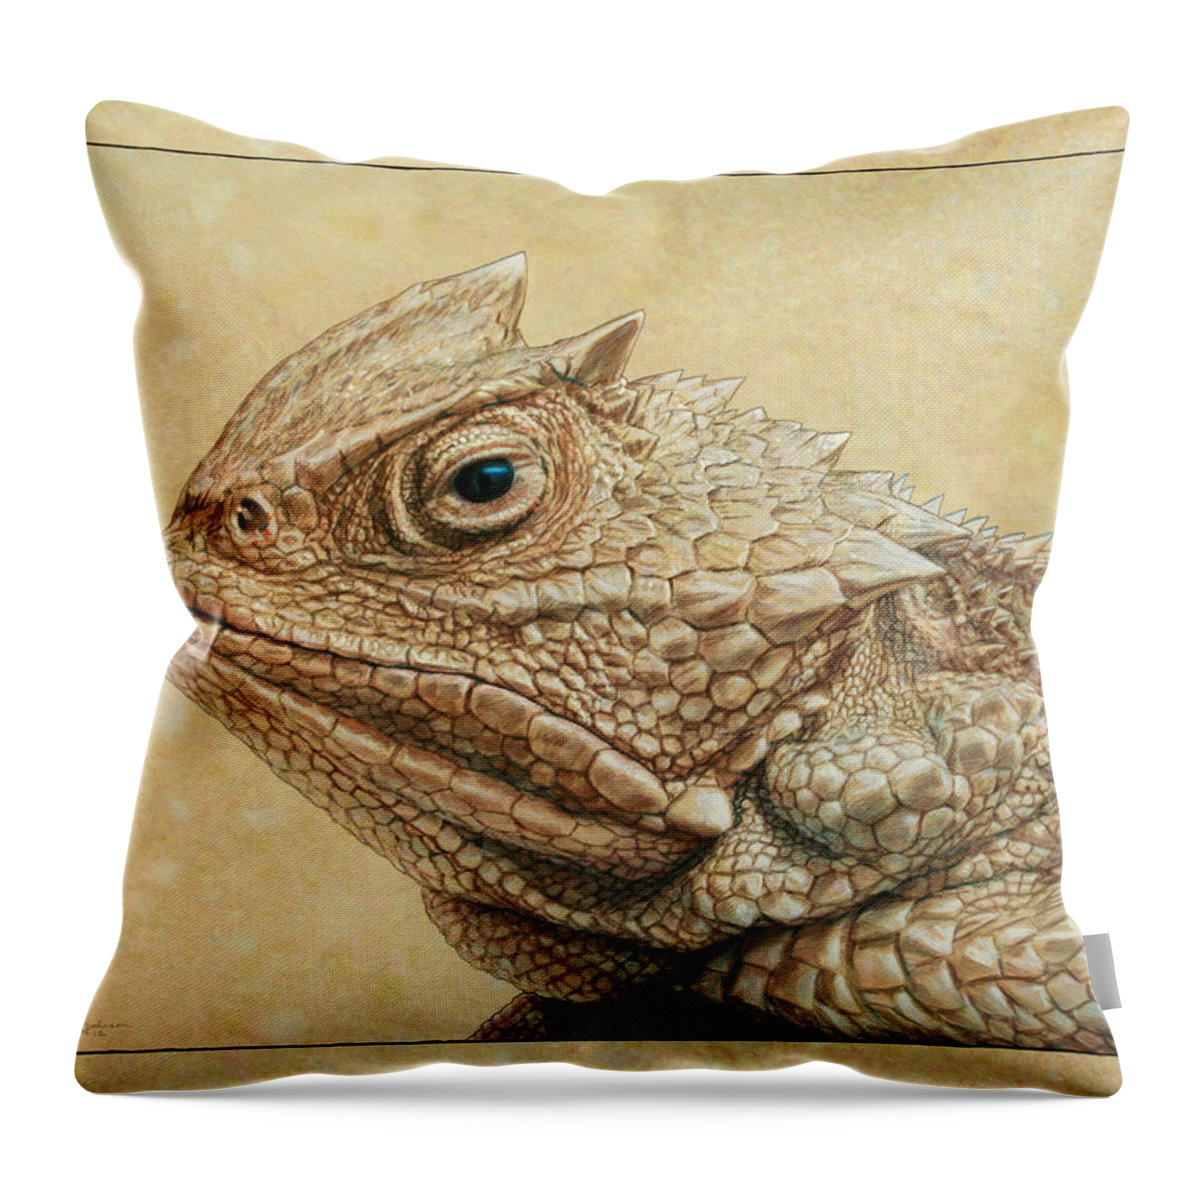 Horned Toad Throw Pillow featuring the painting Horned Toad by James W Johnson